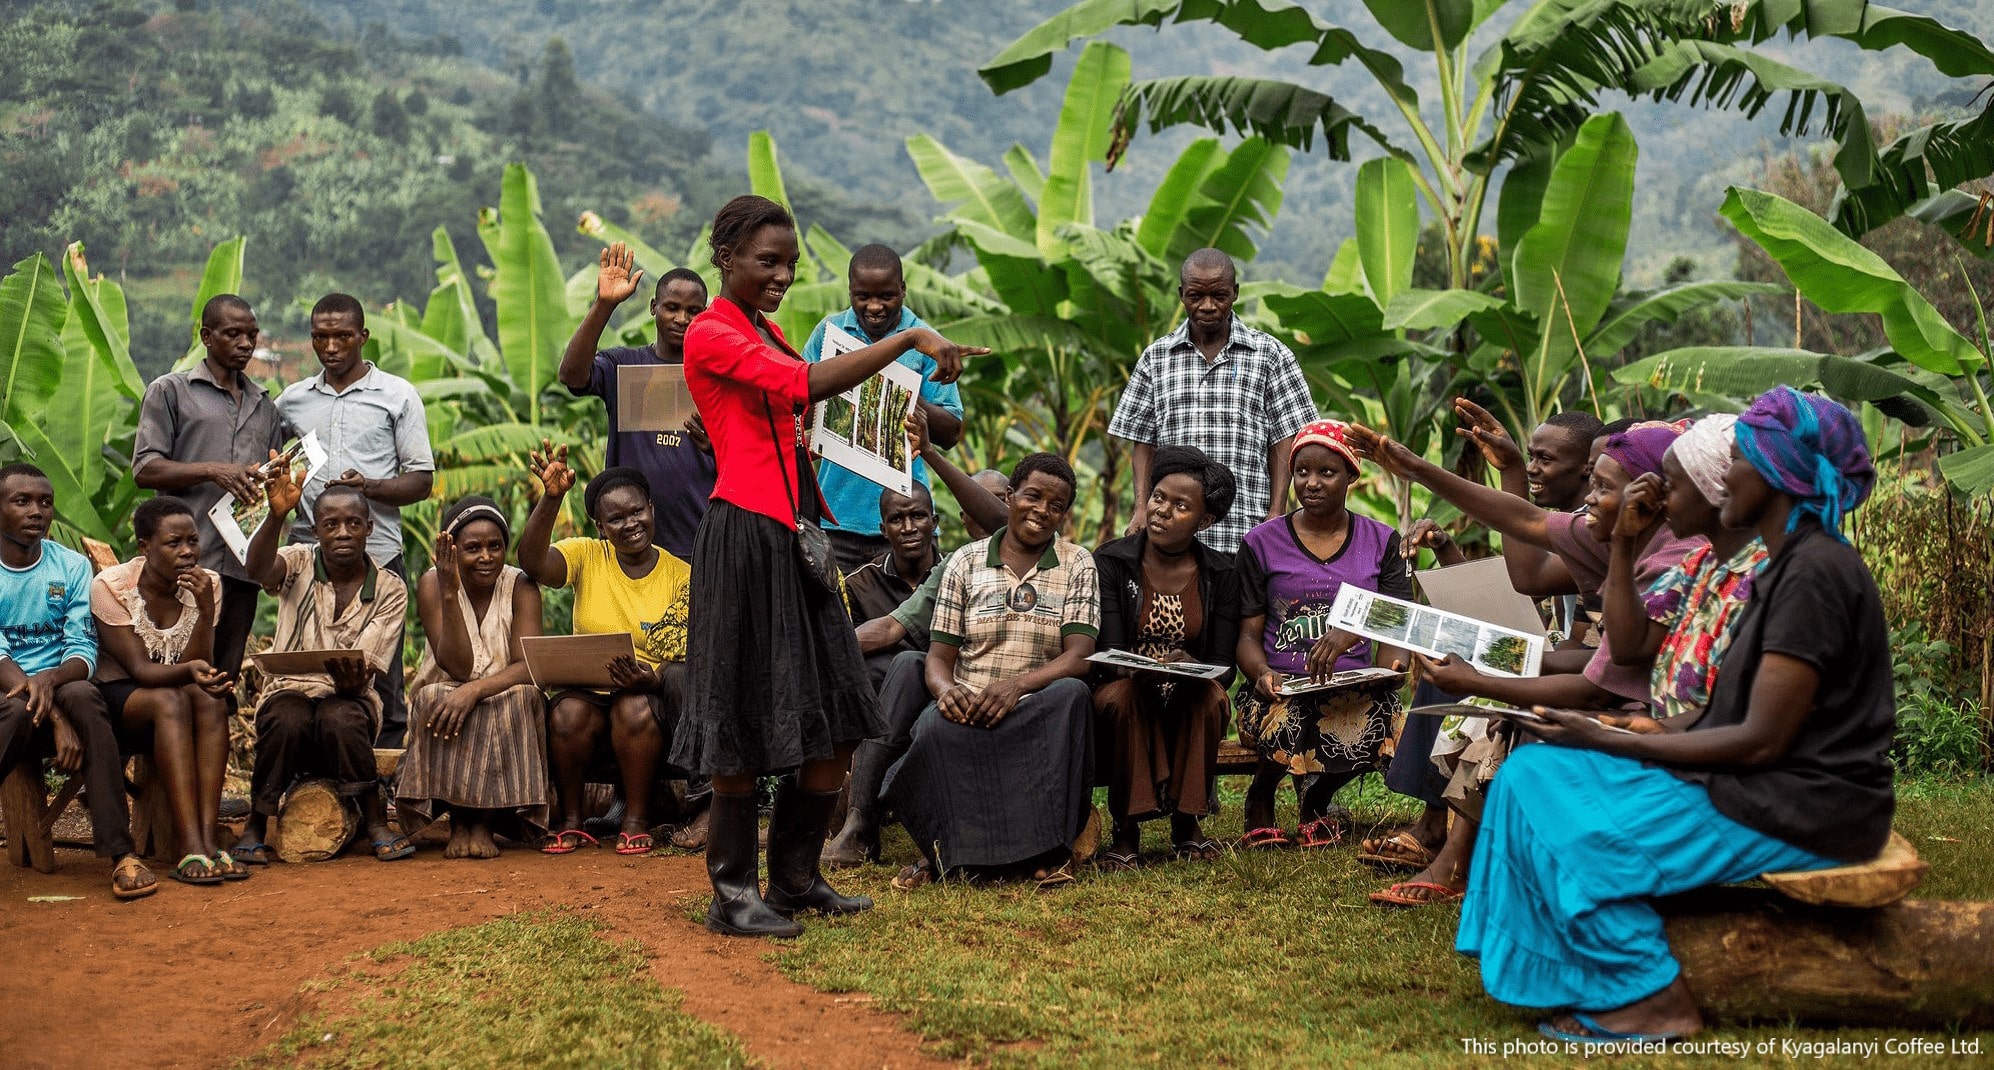 This photo shows training session at a coffee farm in Mt. Elgon, Uganda. Courtesy of Kyagalanyi Coffee Ltd.